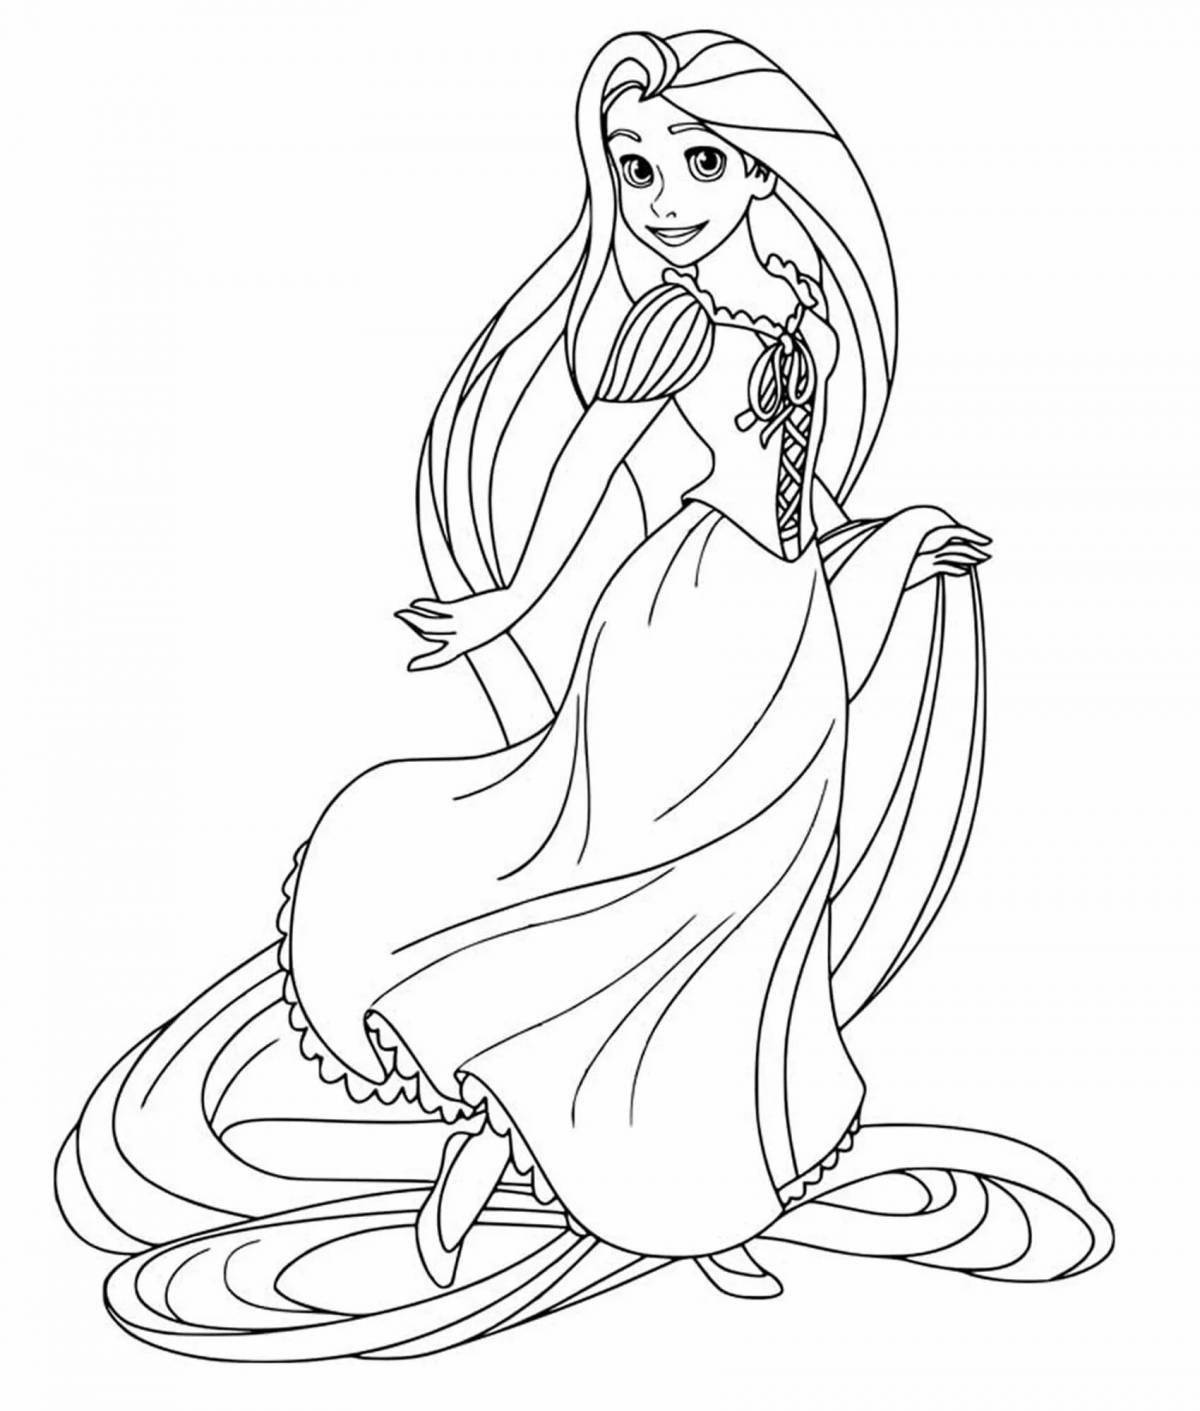 Rapunzel coloring book for kids 5-6 years old